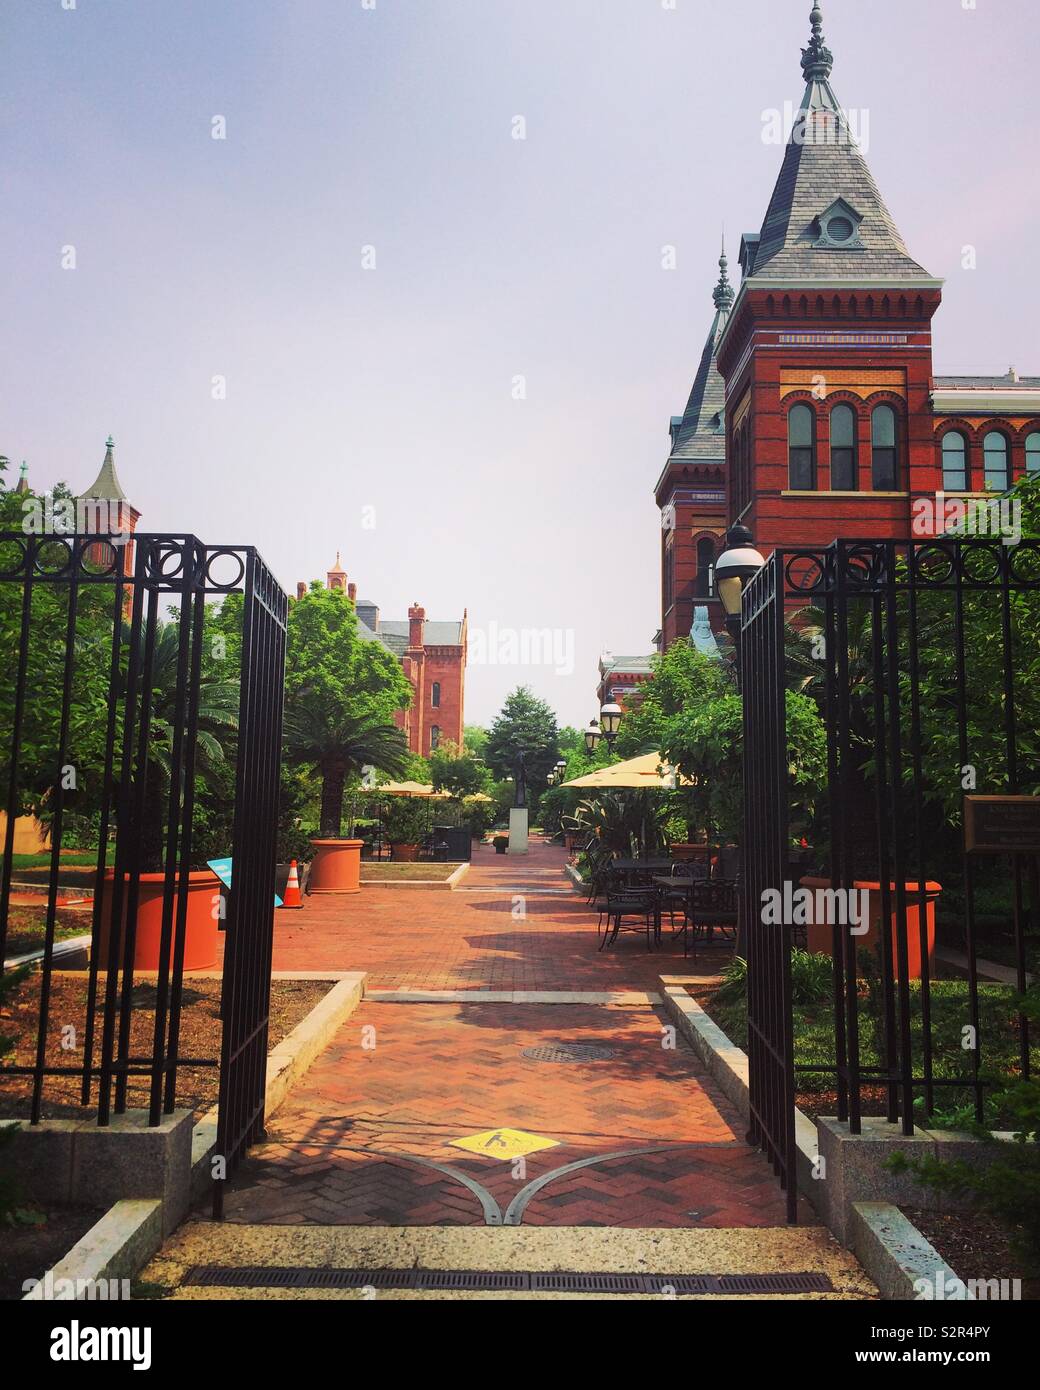 Enid A Haupt Garden and the Arts and Industries Building (right,) Smithsonian Institution, Washington, D.C., United States Stock Photo